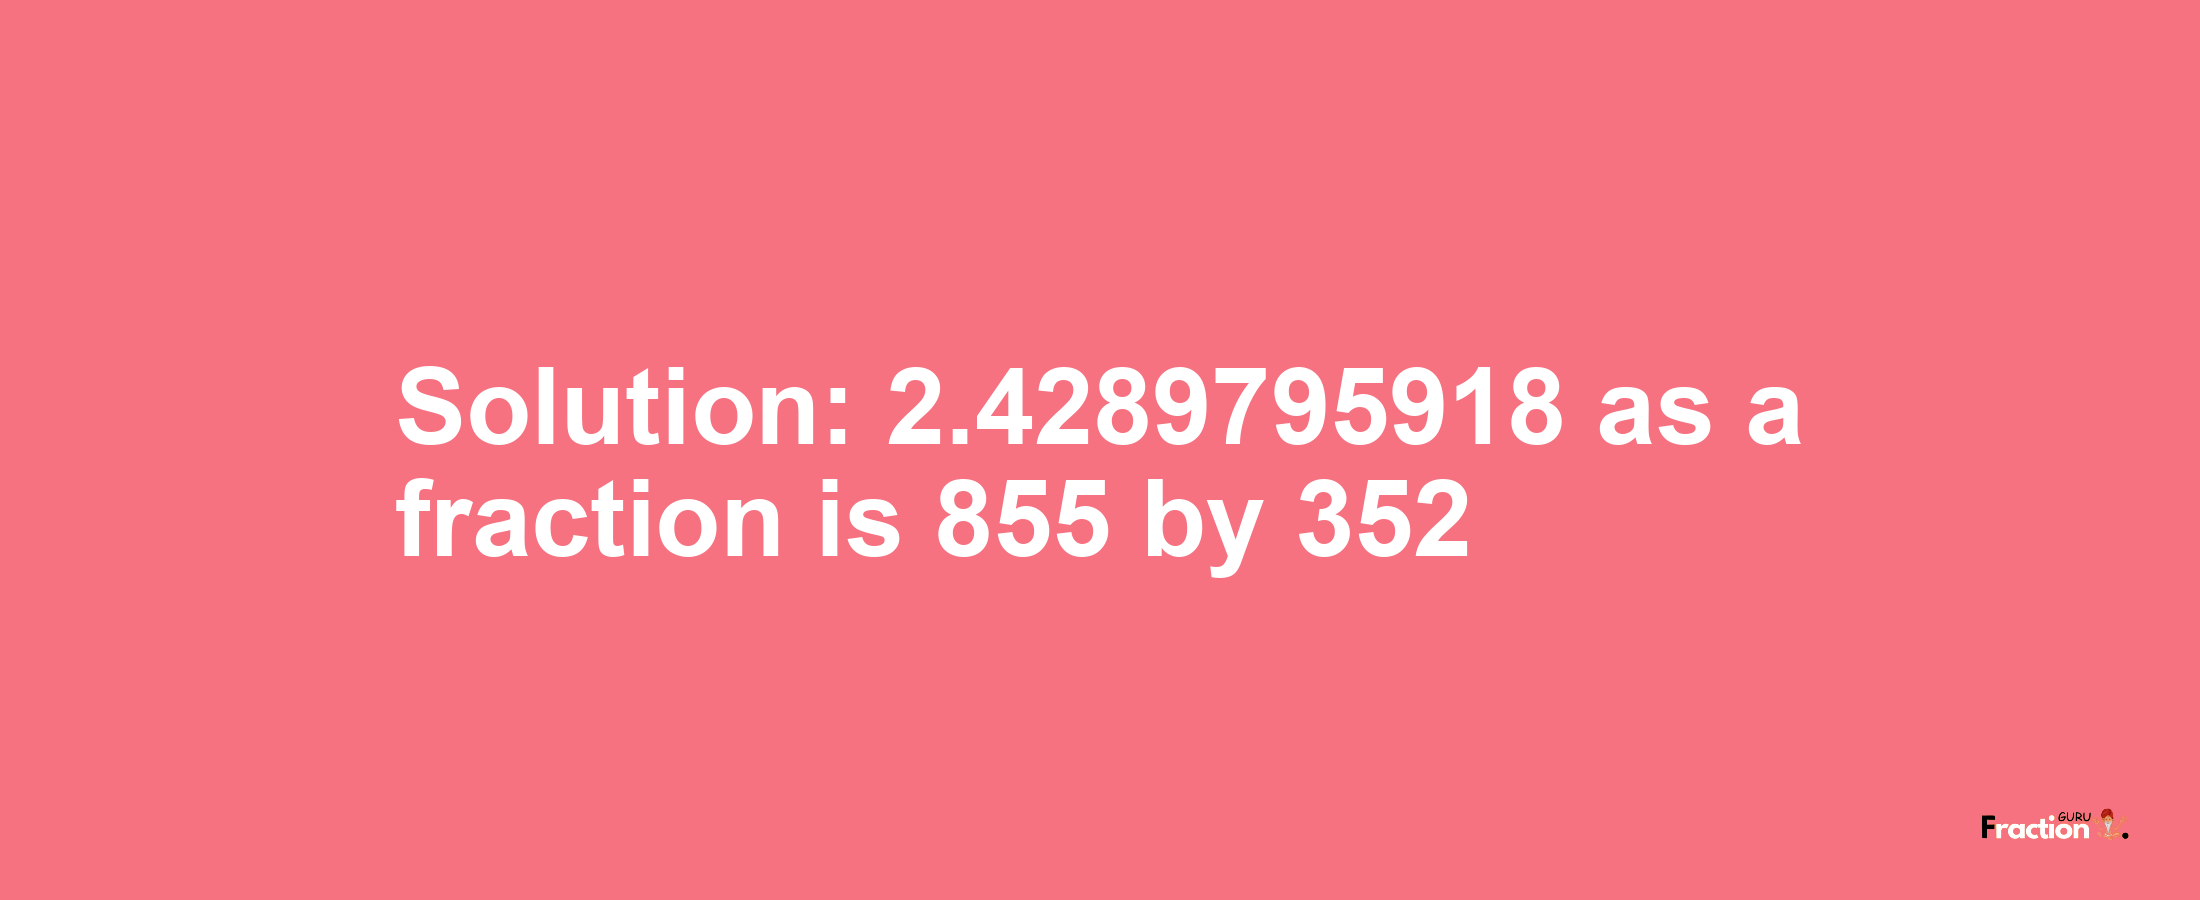 Solution:2.4289795918 as a fraction is 855/352